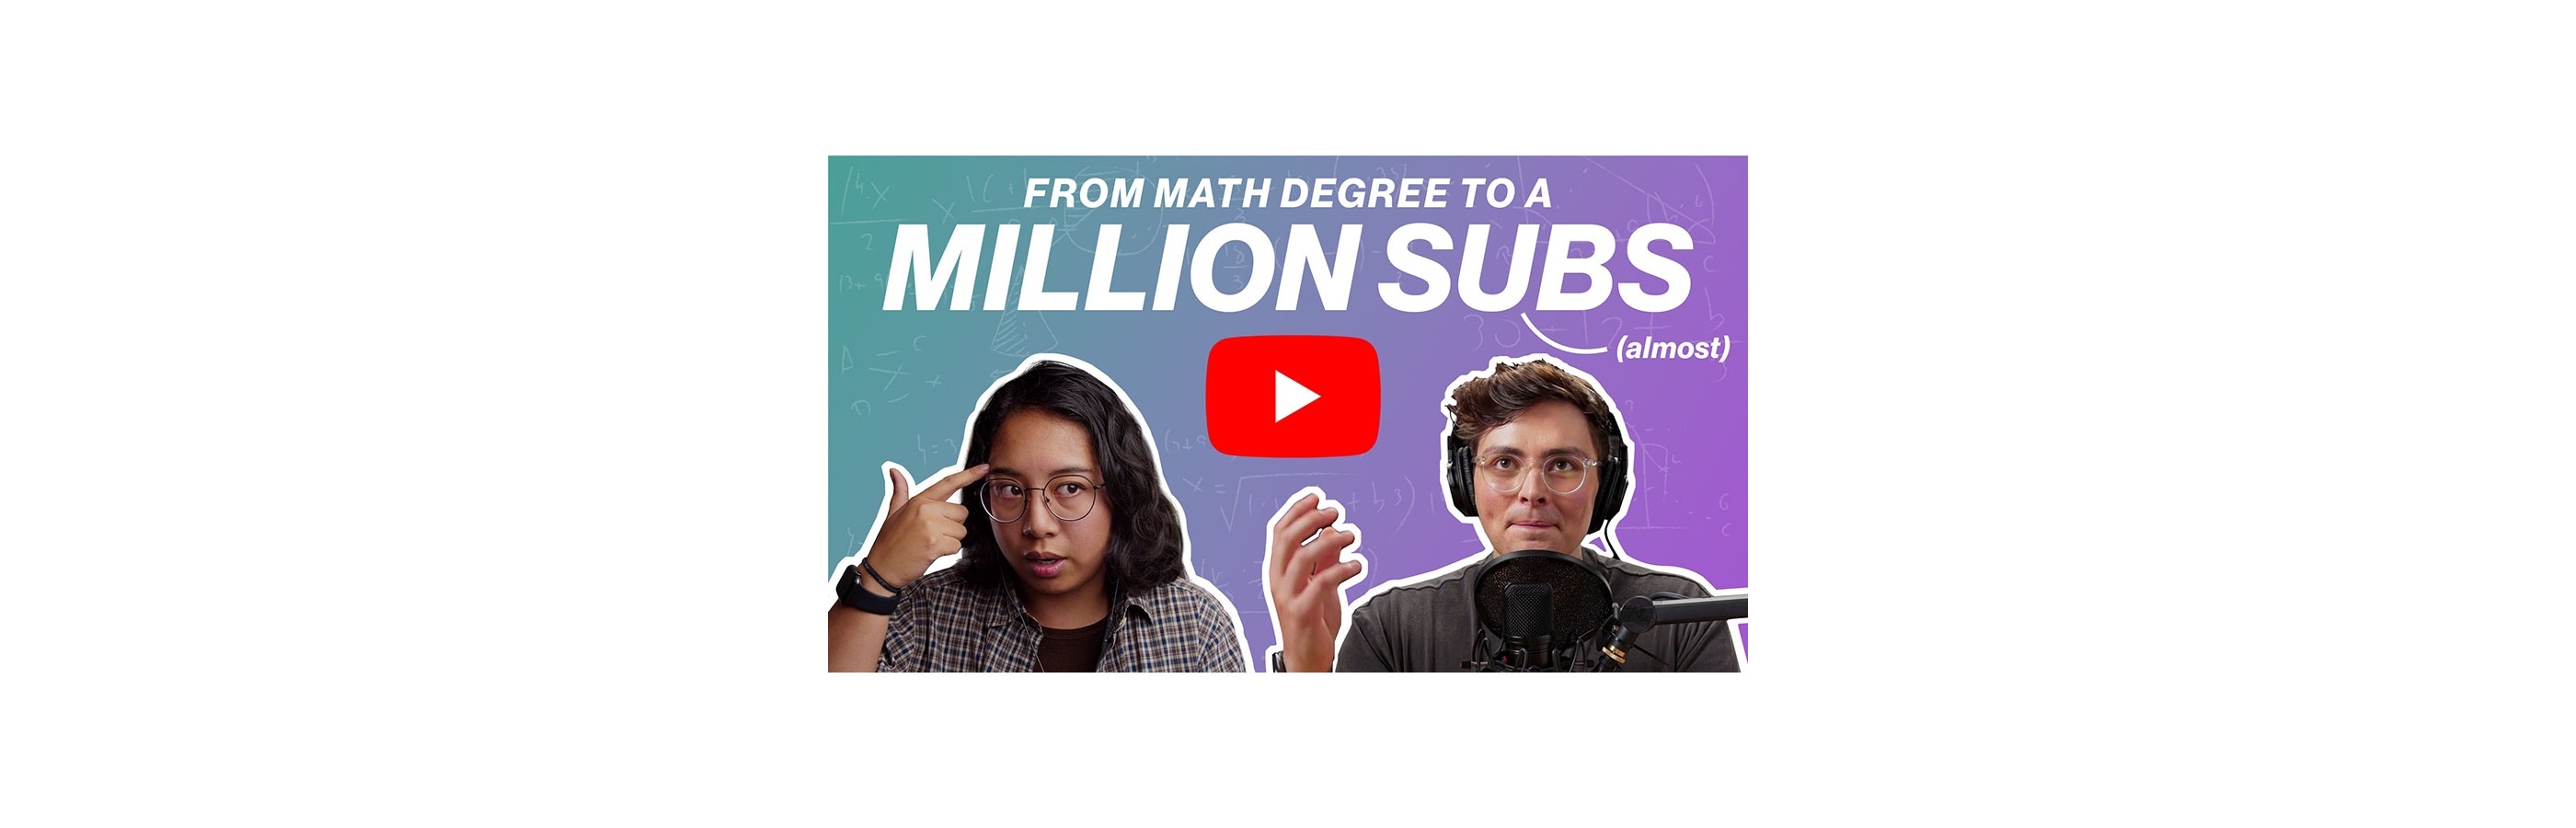 From Math Degree To a Million Subscribers (almost)